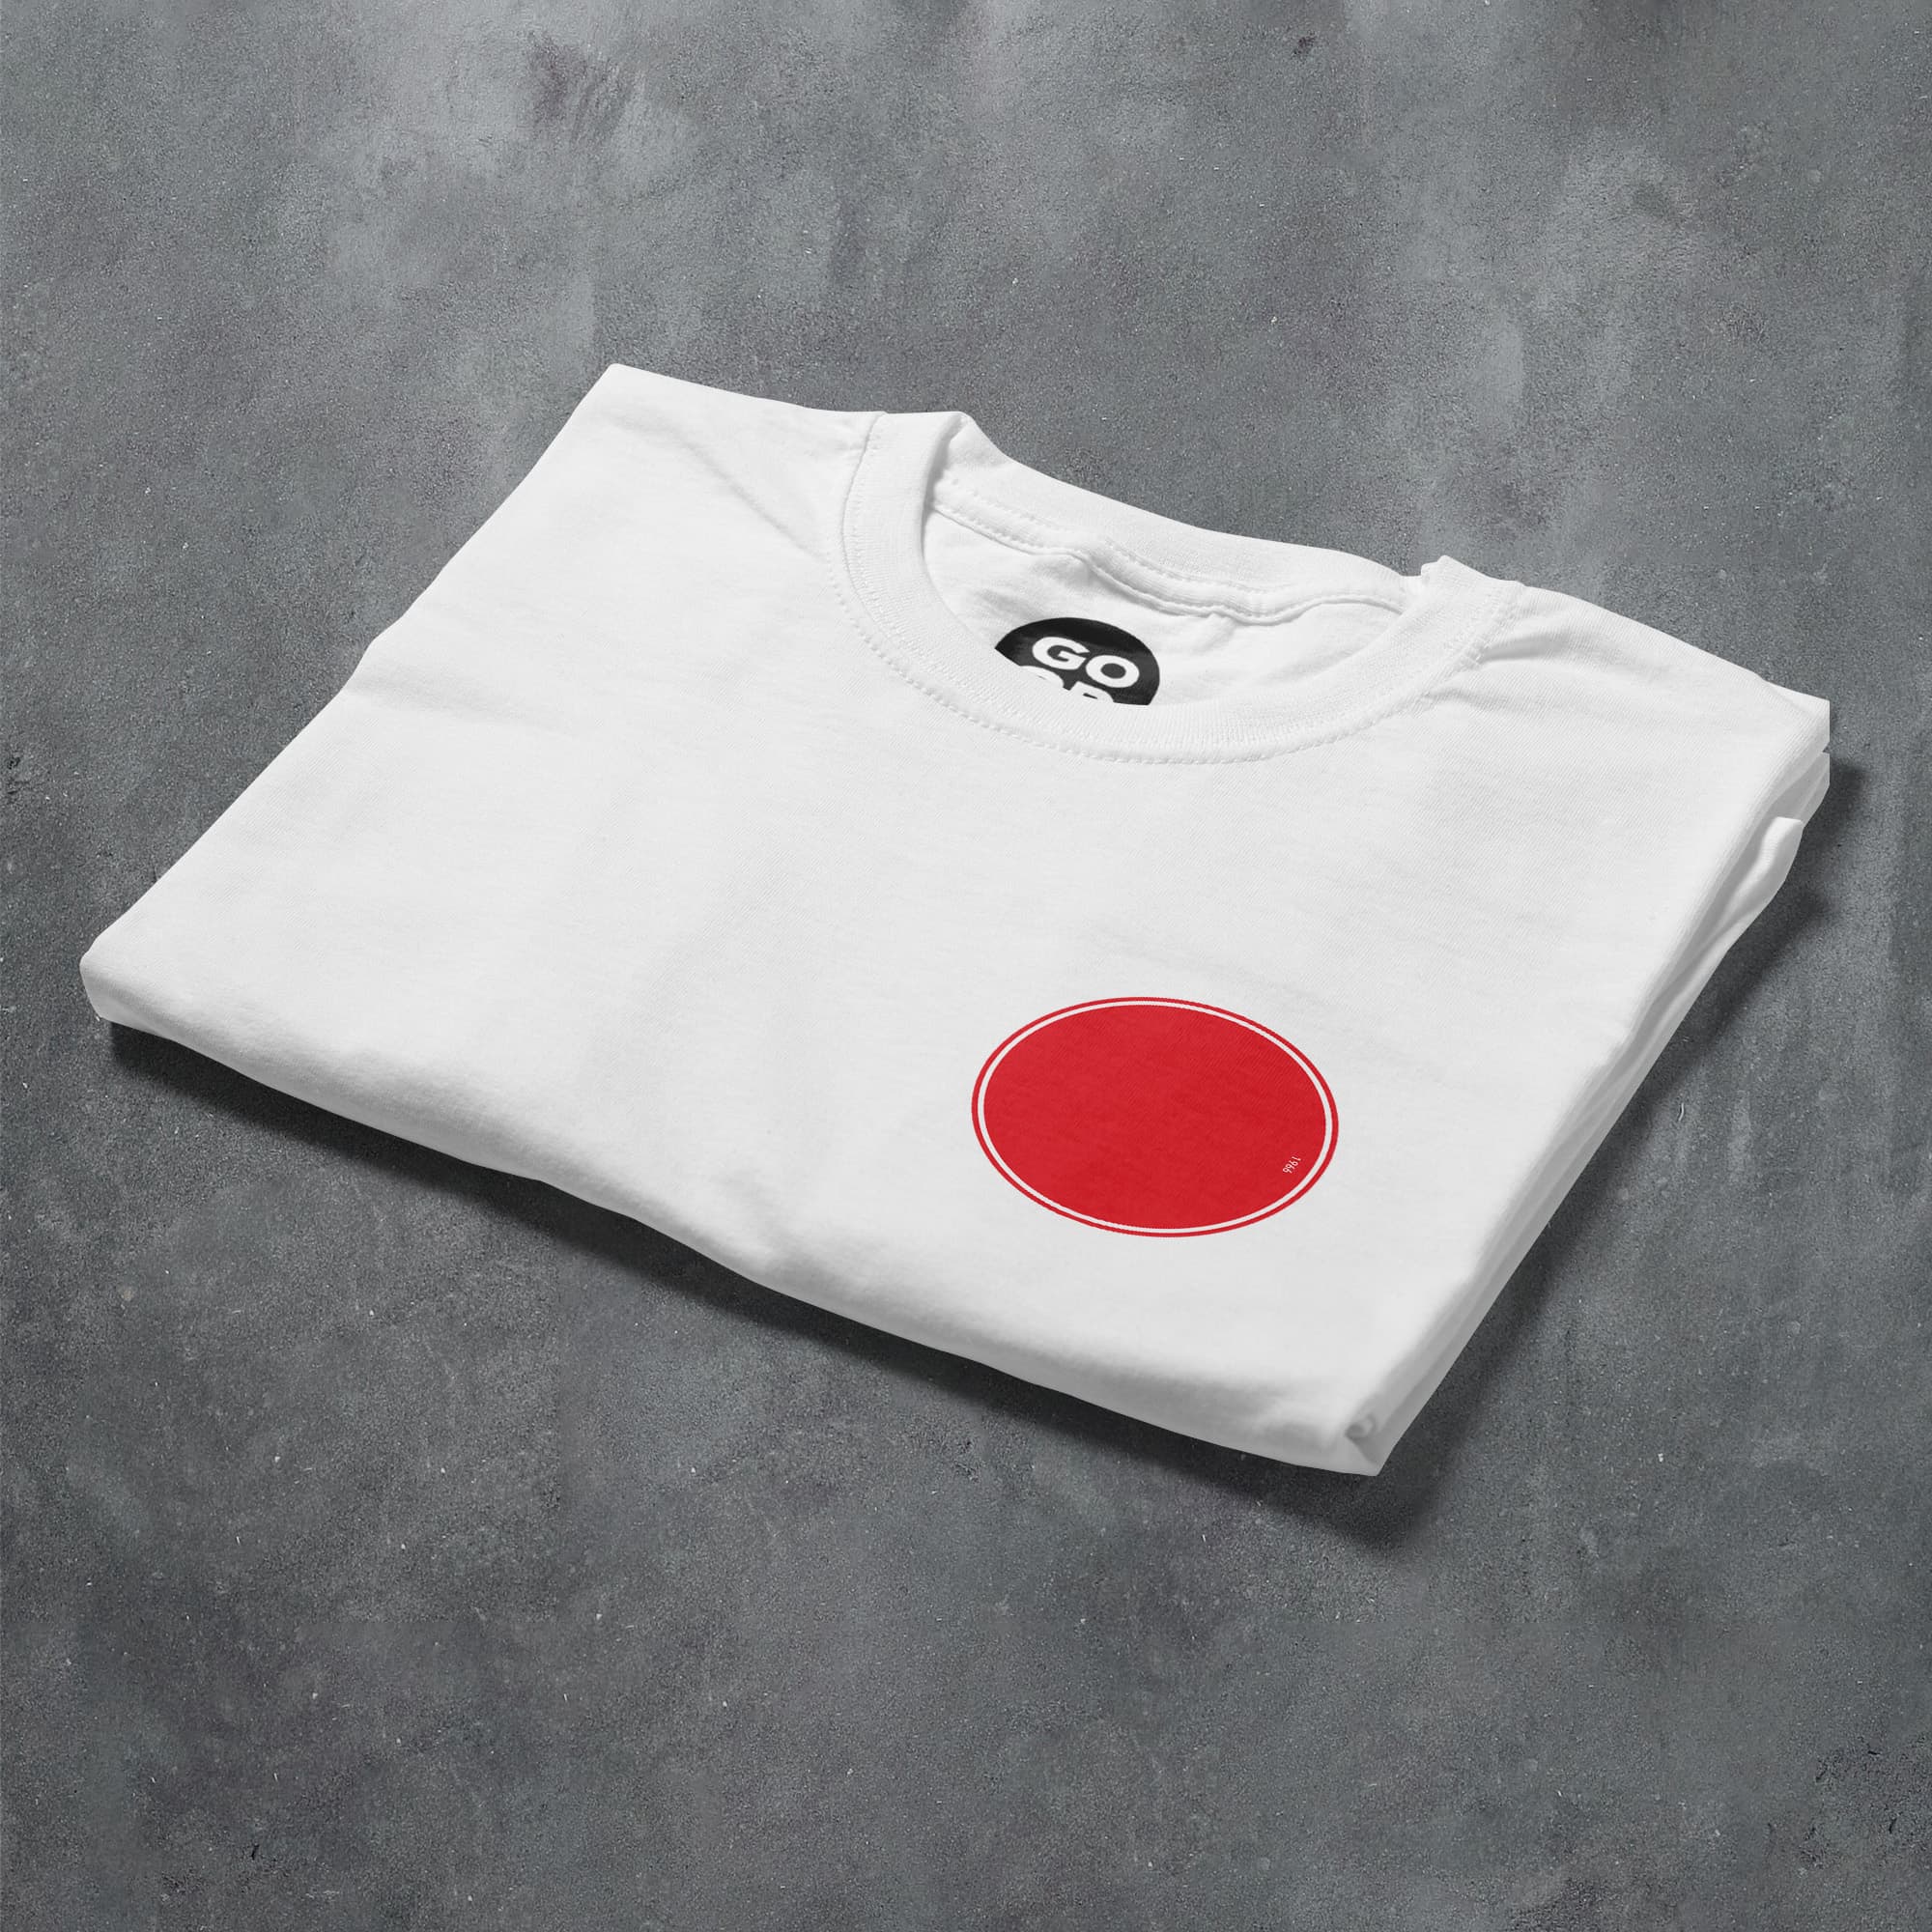 a white t - shirt with a red circle on it